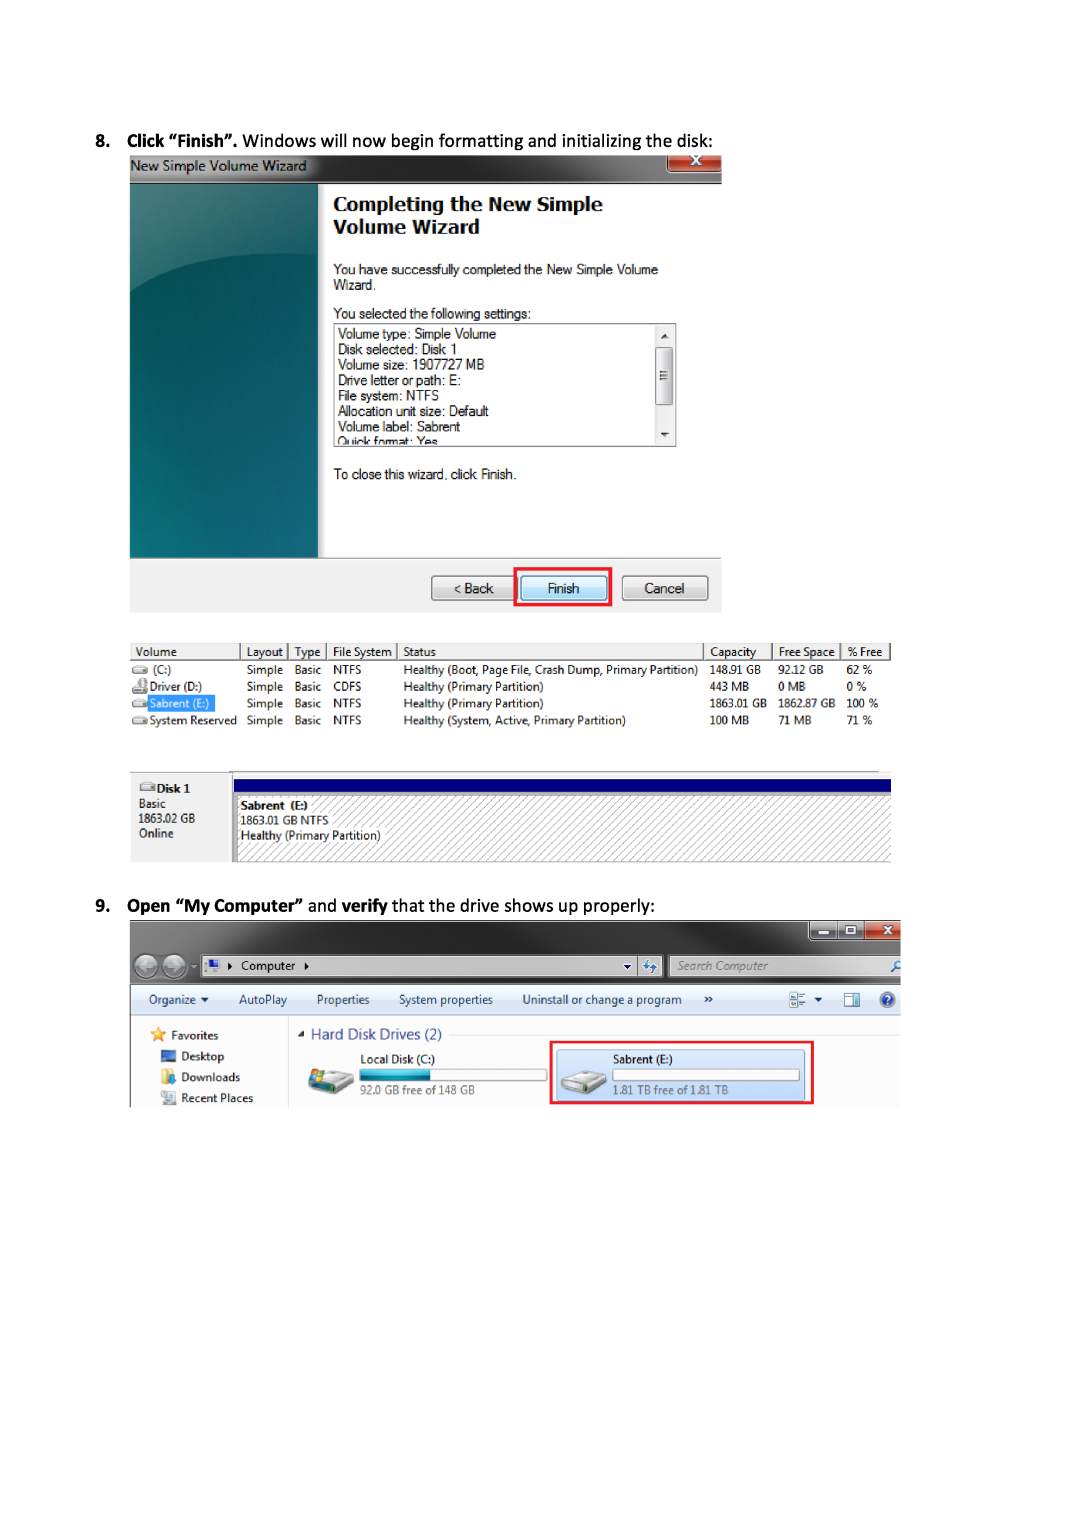 Sabrent USBDSC5 manual Open “My Computer” and verify that the drive shows up properly 